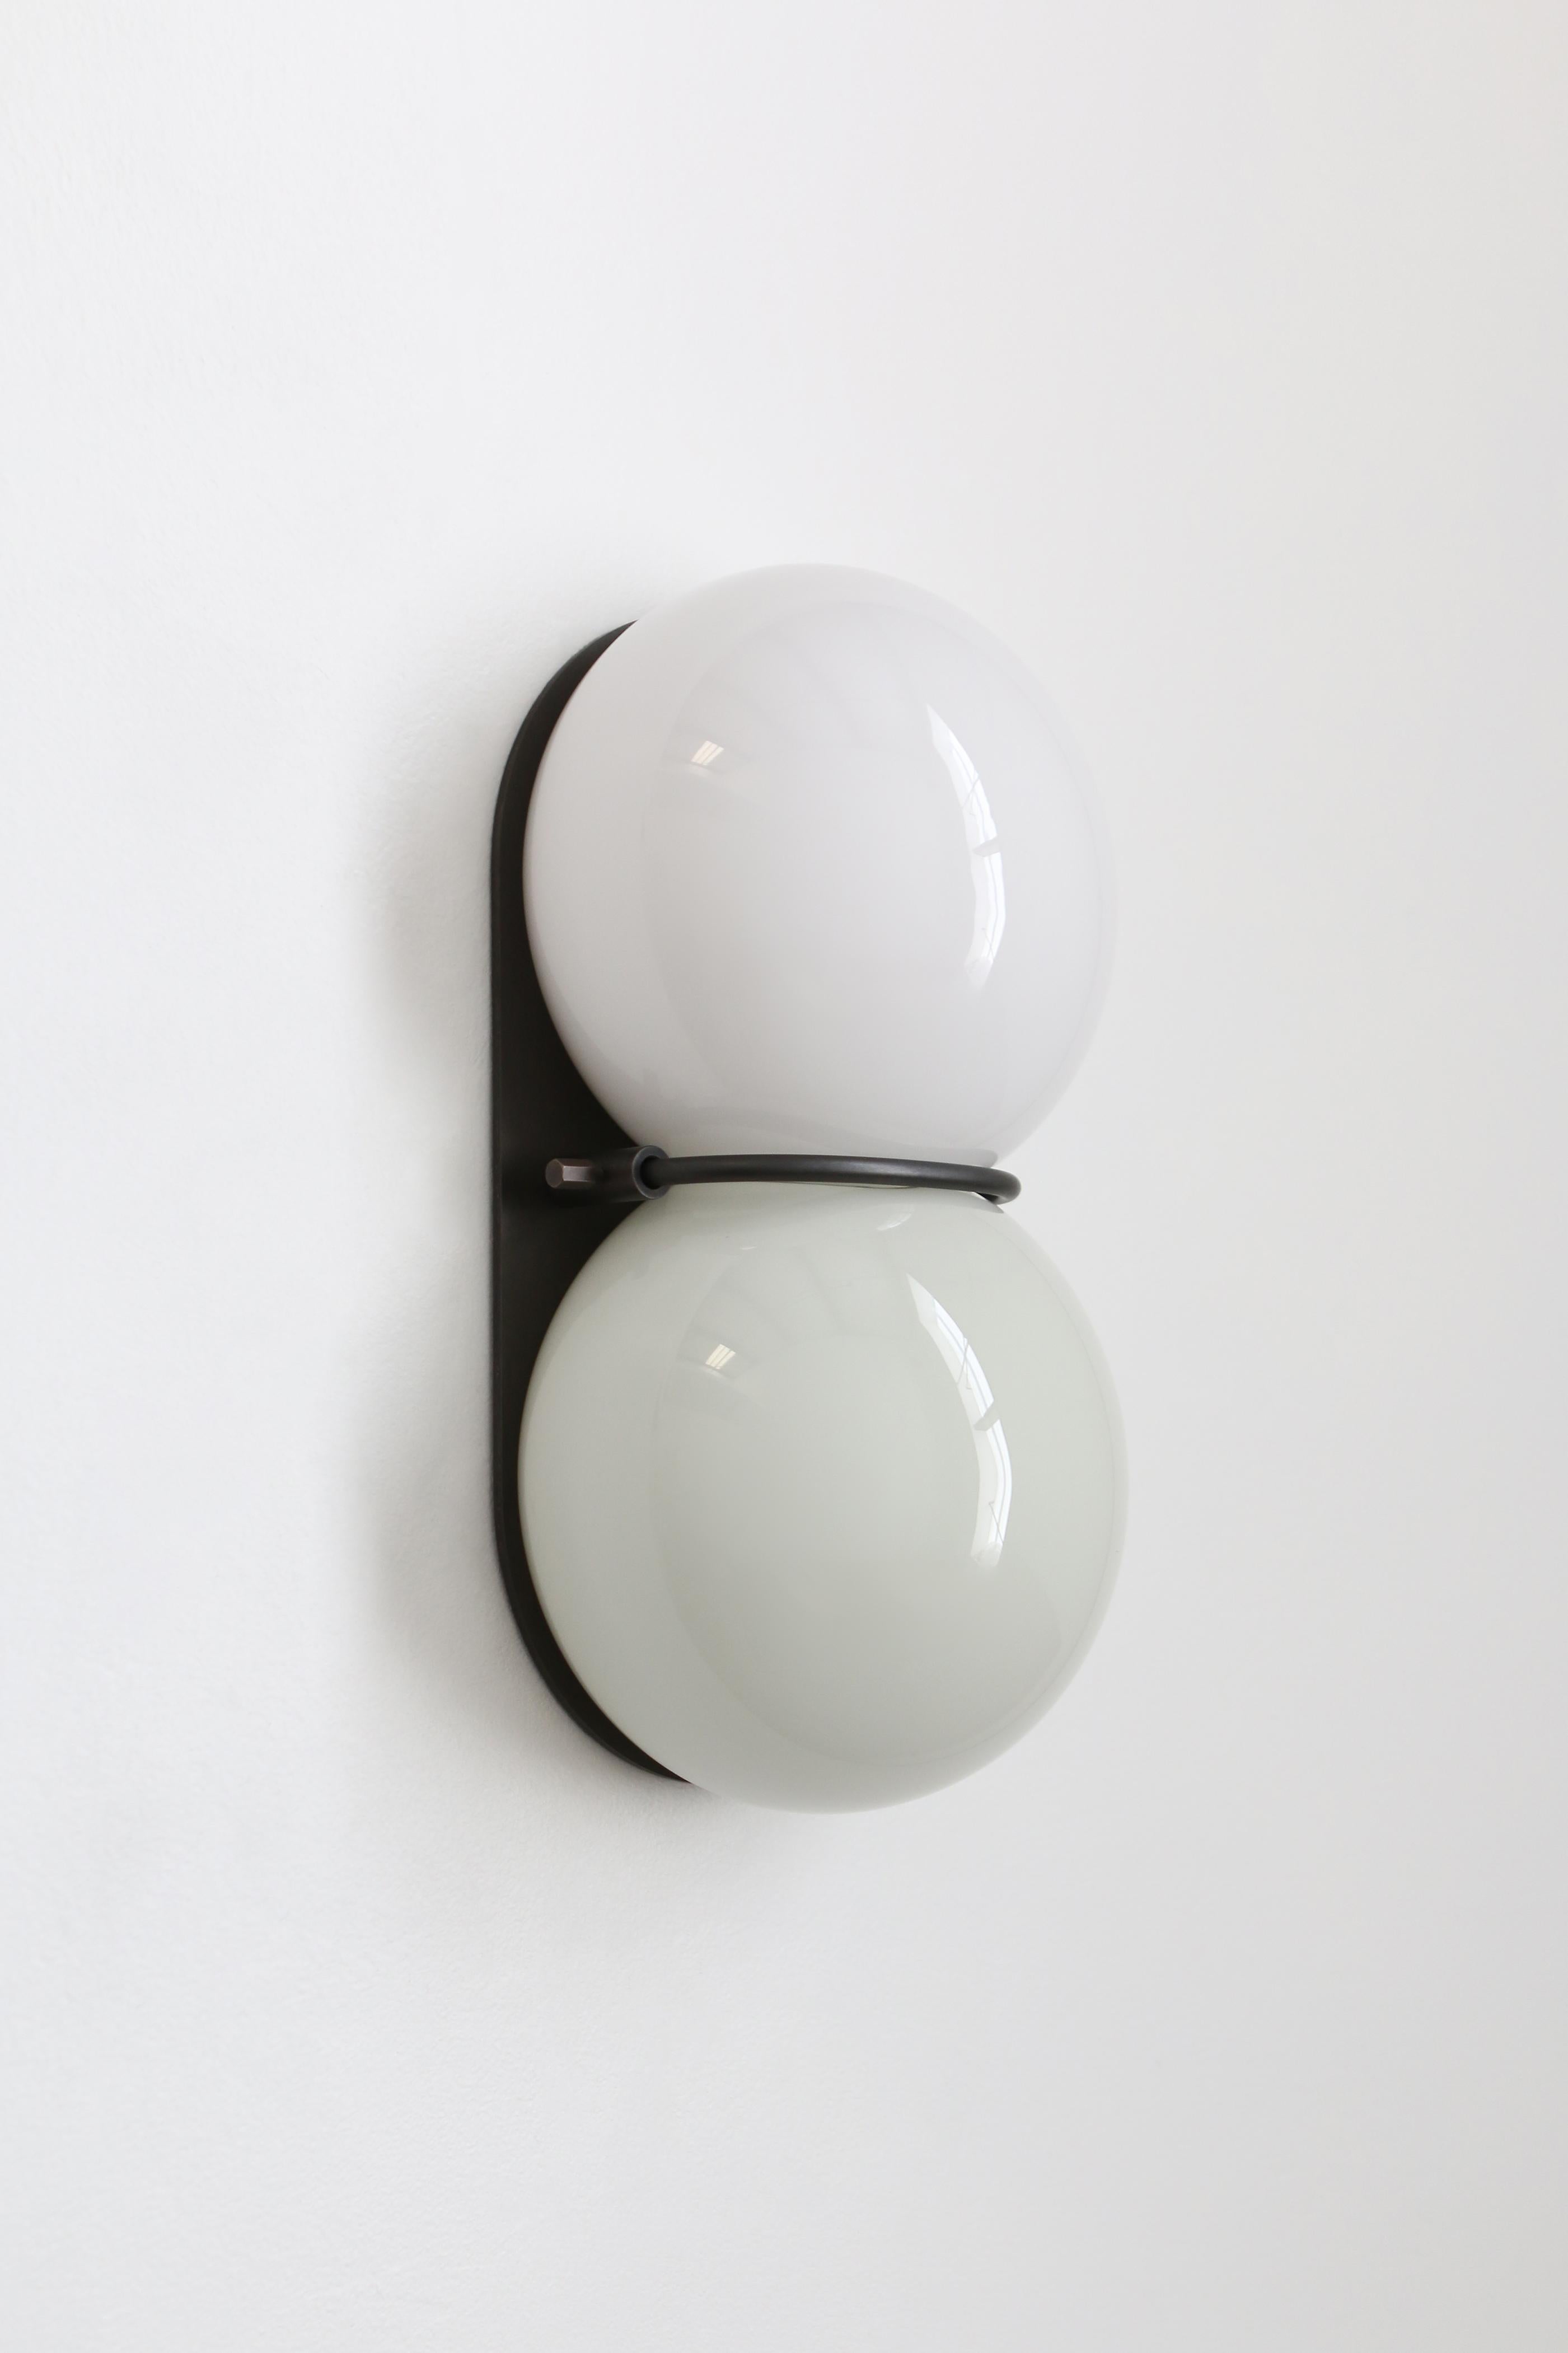 White twin 1.0 sconce by SkLO
Dimensions: D 10 x W 15 x H 28 cm
Materials: glass, metal
Available in blue, mint green, oyster, pastel pink and white palette.
Available in 4 metal finishes: dark oxidized, brushed brass, polished nickel, brushed